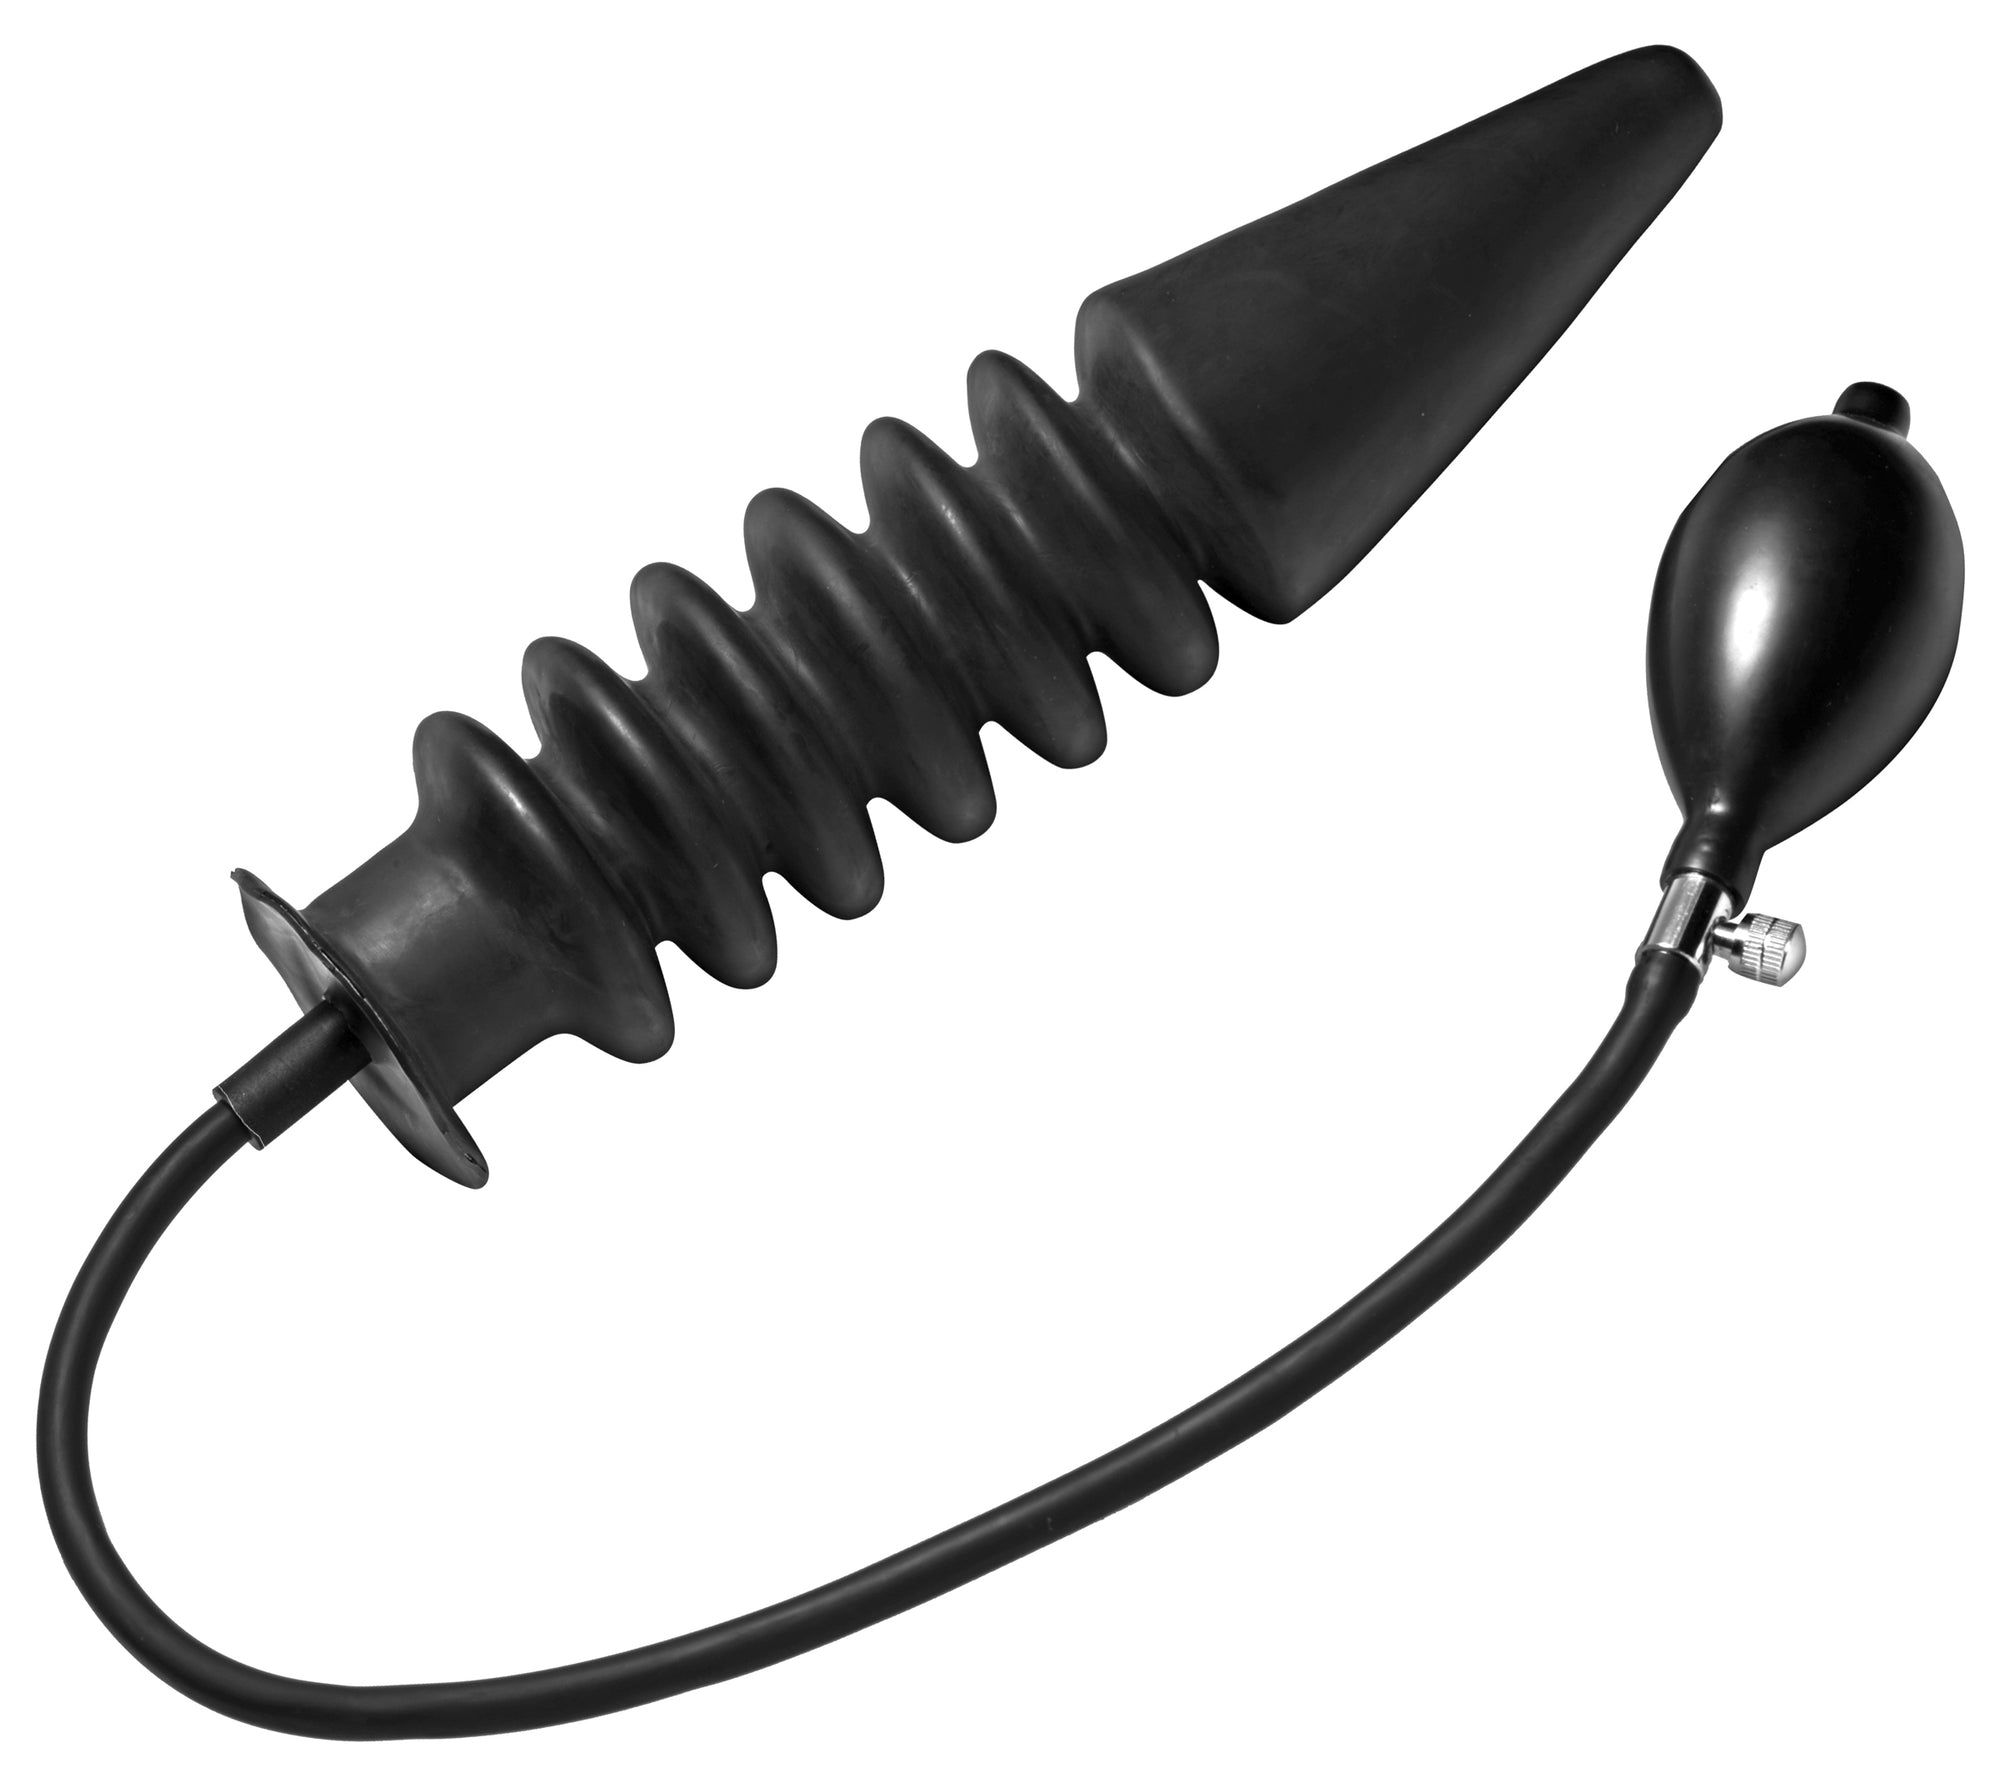 Accordion Inflatable XL Anal Plug | CupidsSecretStash.com
Fill up with this inflatable, accordion style anal plug from the Master Series. Take your anal play to the next level! At Cupid’s Secret Stash
Anal Toys
Master Series